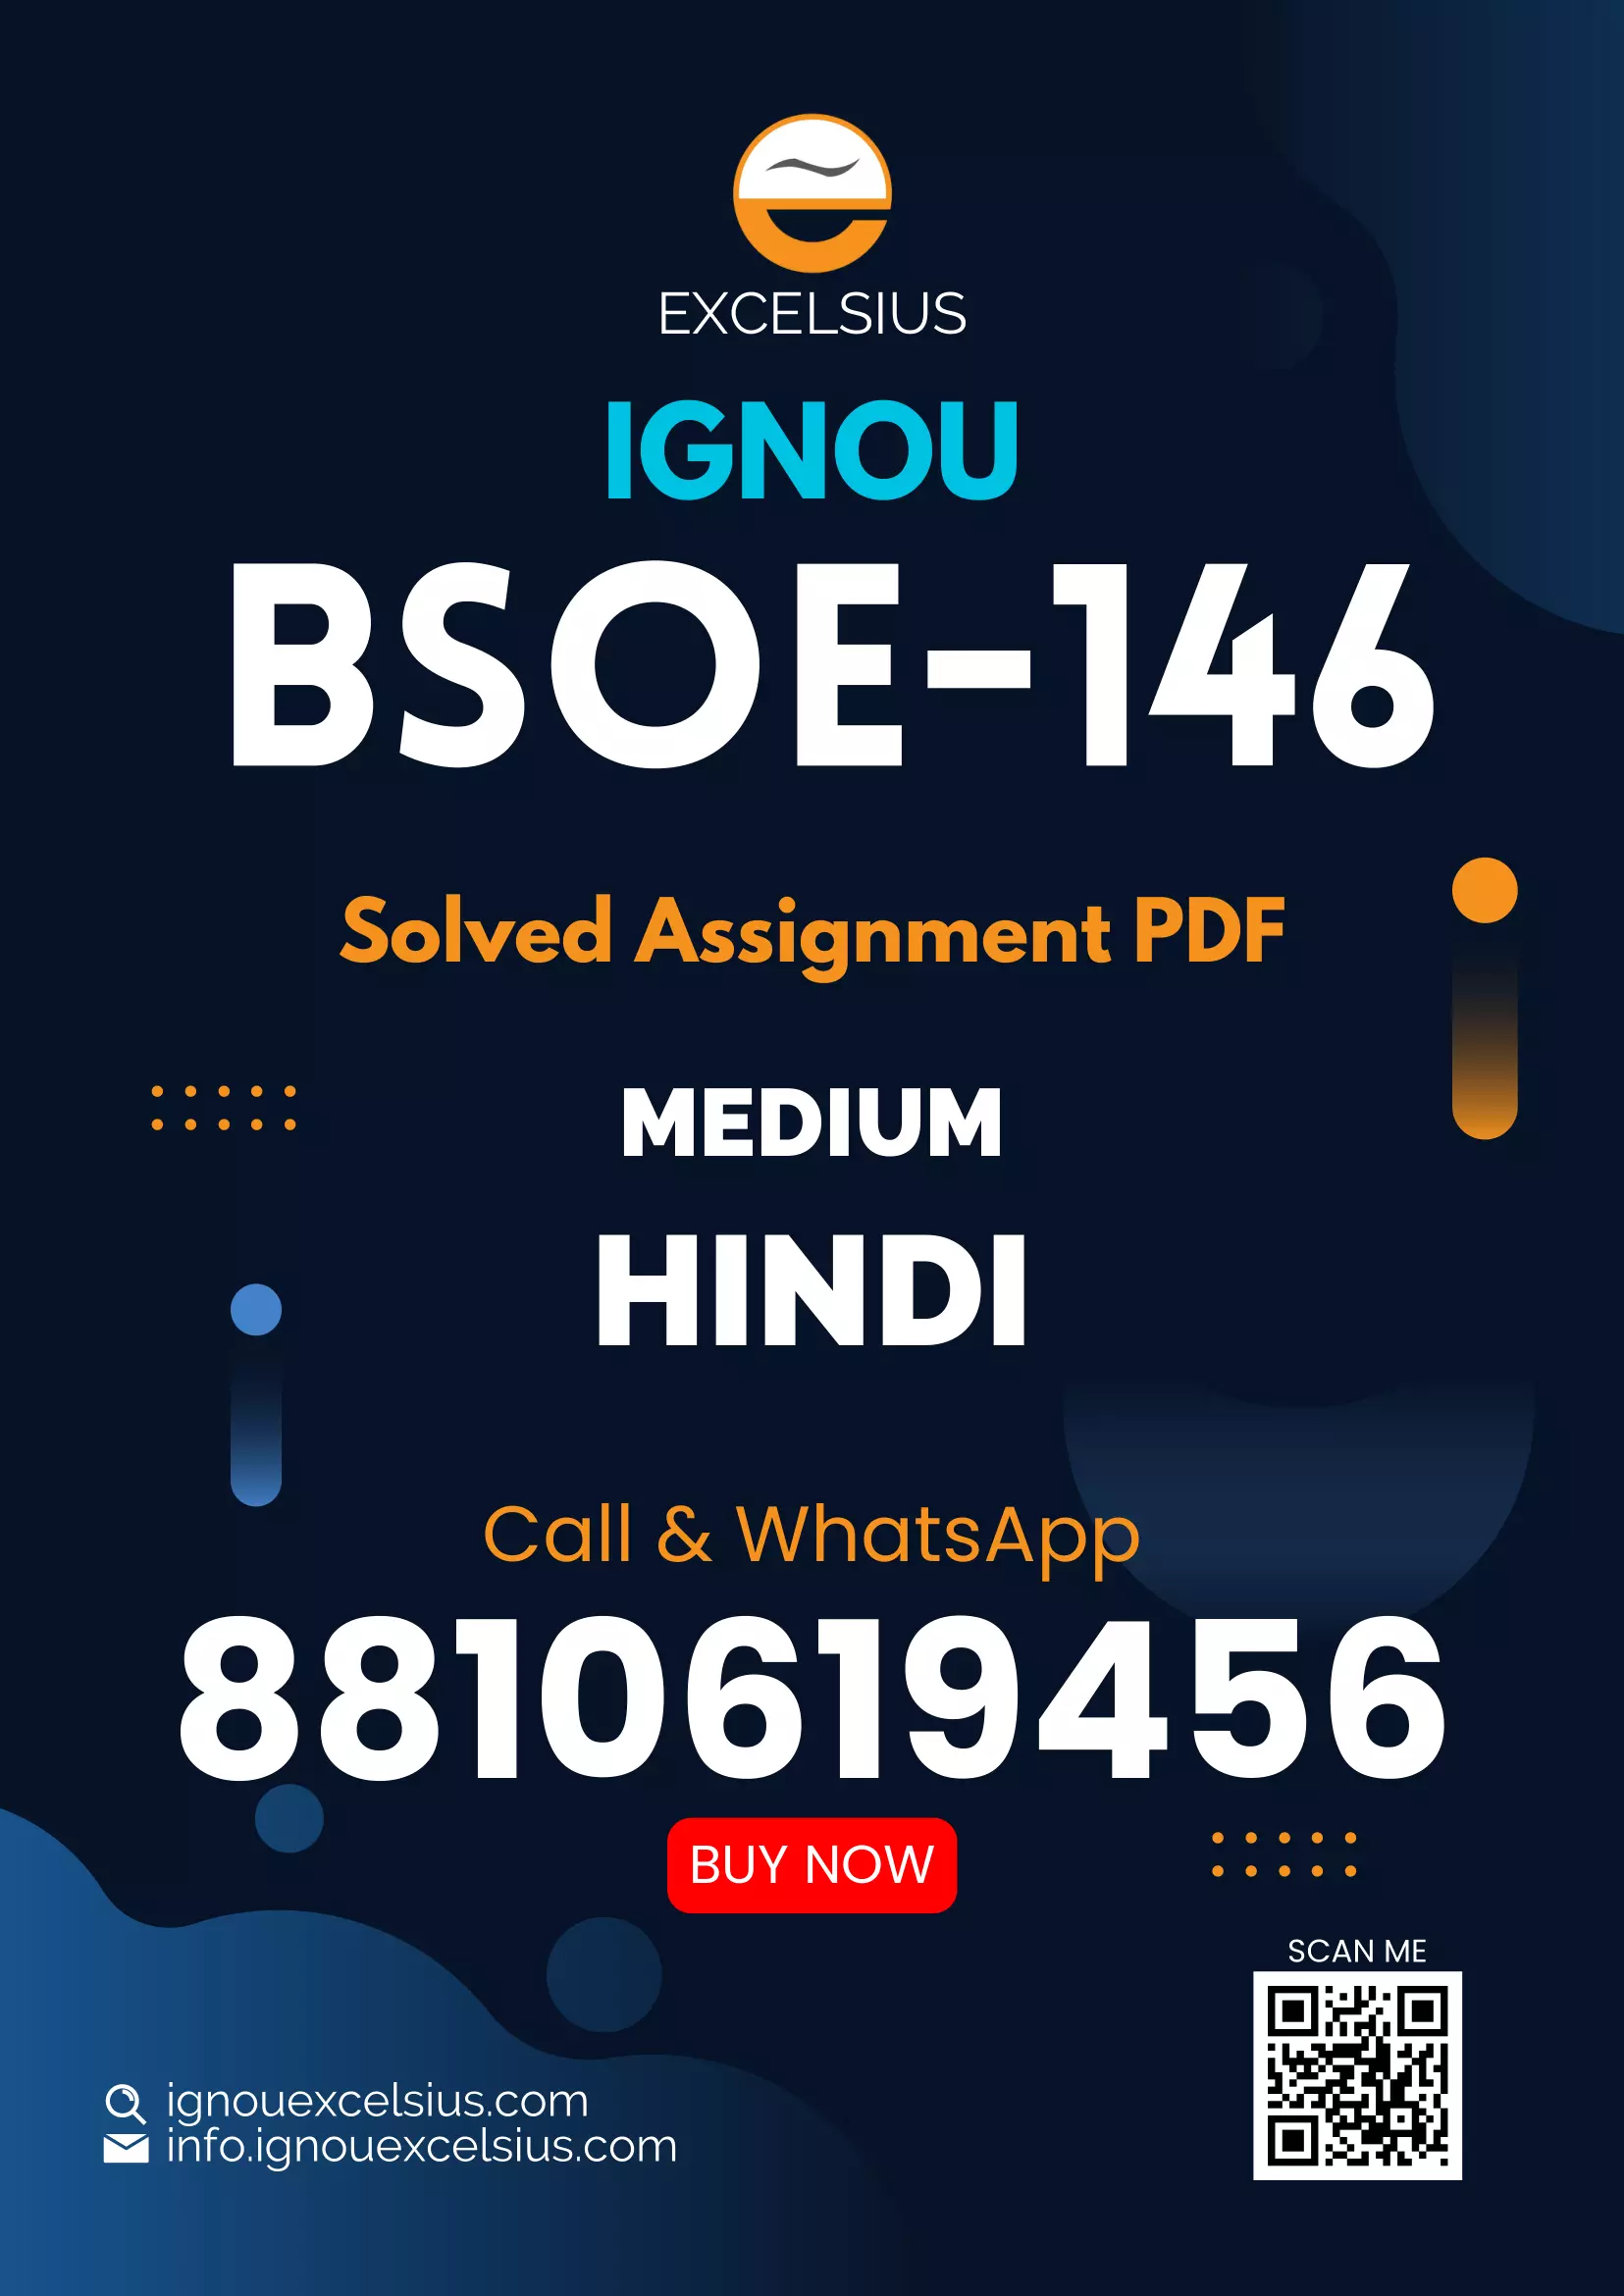 IGNOU BSOE-146 - Marriage, Family and Kinship, Latest Solved Assignment-July 2022 – January 2023